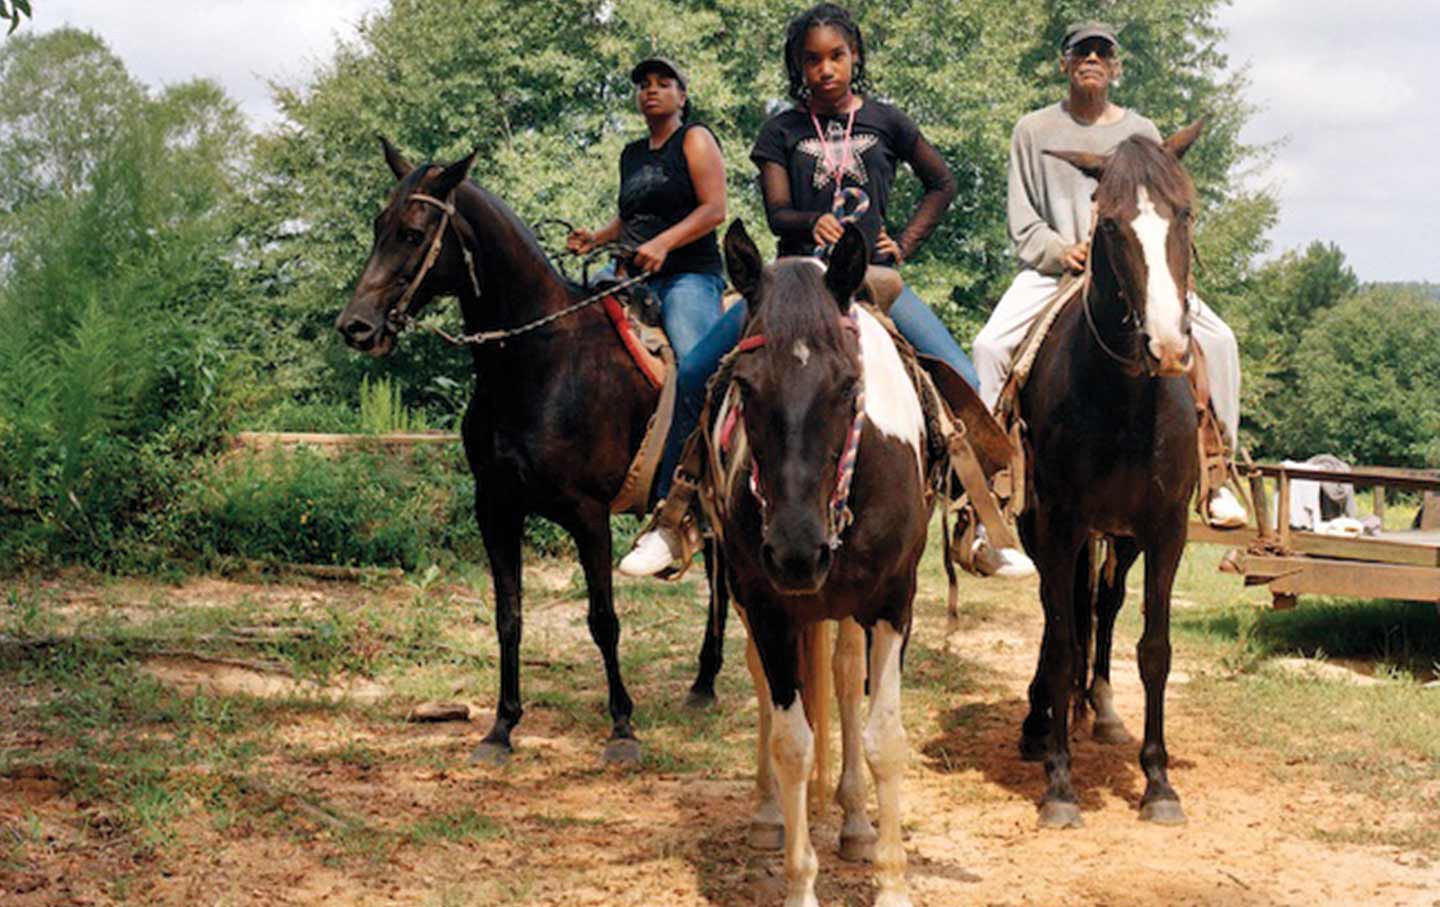 LaToya Ruby Frazier’s “Zion, Her Mother Shea, and Her Grandfather Mr. Smiley Riding on Their Tennessee Walking Horses, Mares, P.T. (P.T.’s Miss One of a Kind), Dolly (Secretly), and Blue (Blue’s Royal Threat), Newton, Mississippi.”